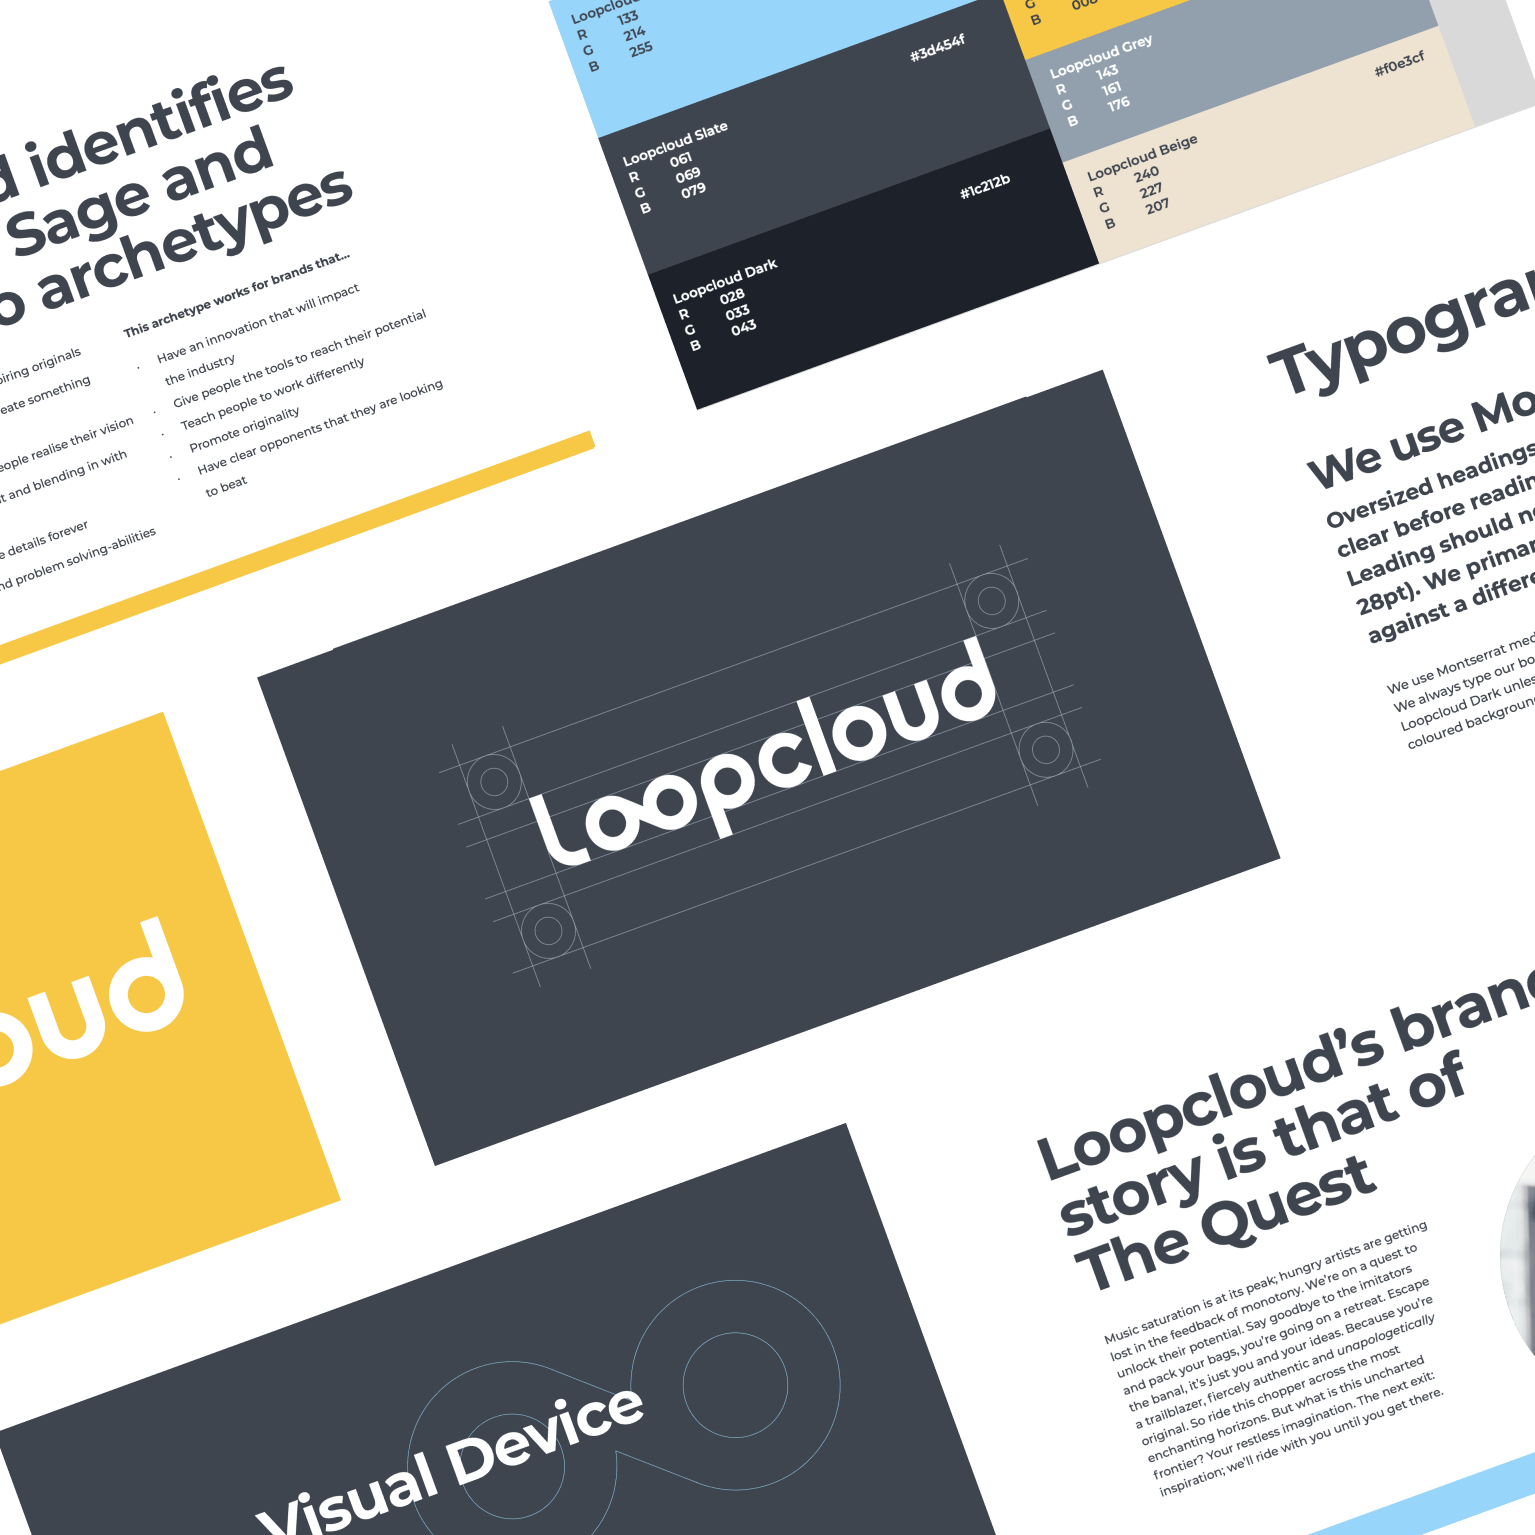 Brand strategy client example - Loopcloud